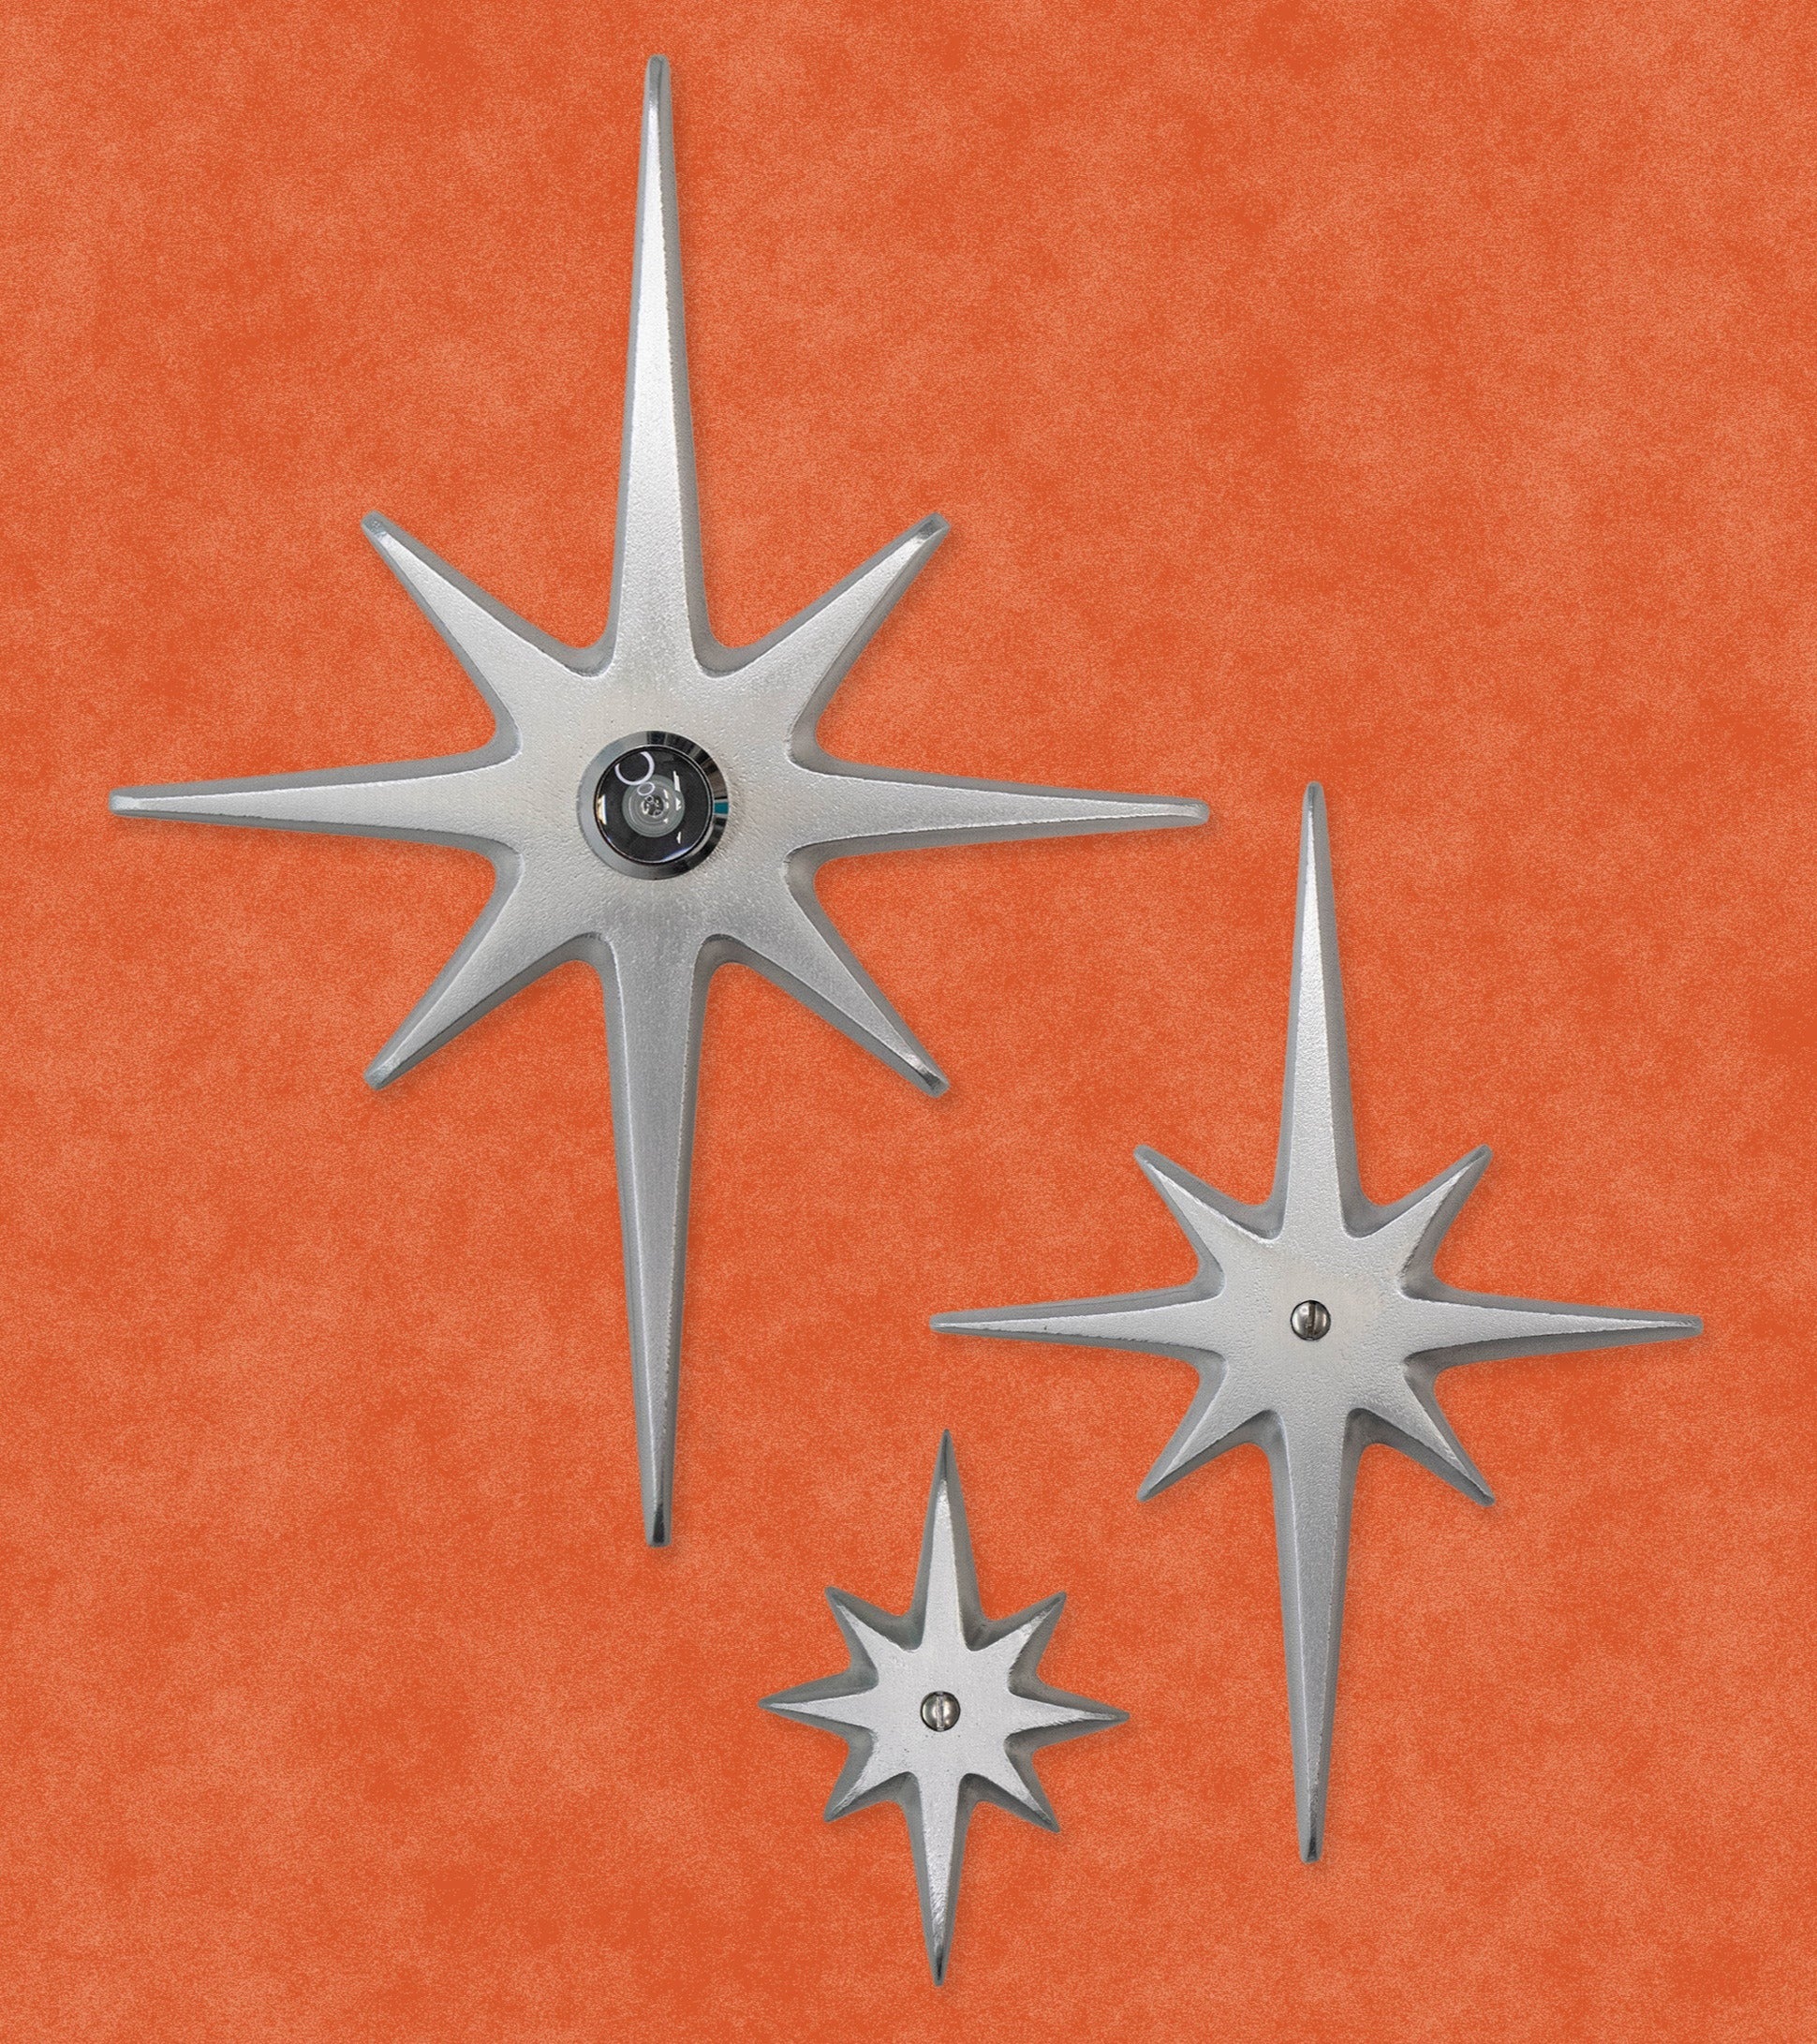 A set of three cast aluminum starbursts: Large, medium, and small. The largest one has a peephole viewer in the center, while the other two have a single screw at their centers. The style of starburst has the 2 longest points top and bottom, 2 medium points horizontal, and the other 4 shortest points diagonal in between. The aluminum is silver in color. They have a smooth but slightly textured finish due to the natural aluminum. There is slight shine, but are not glossy.